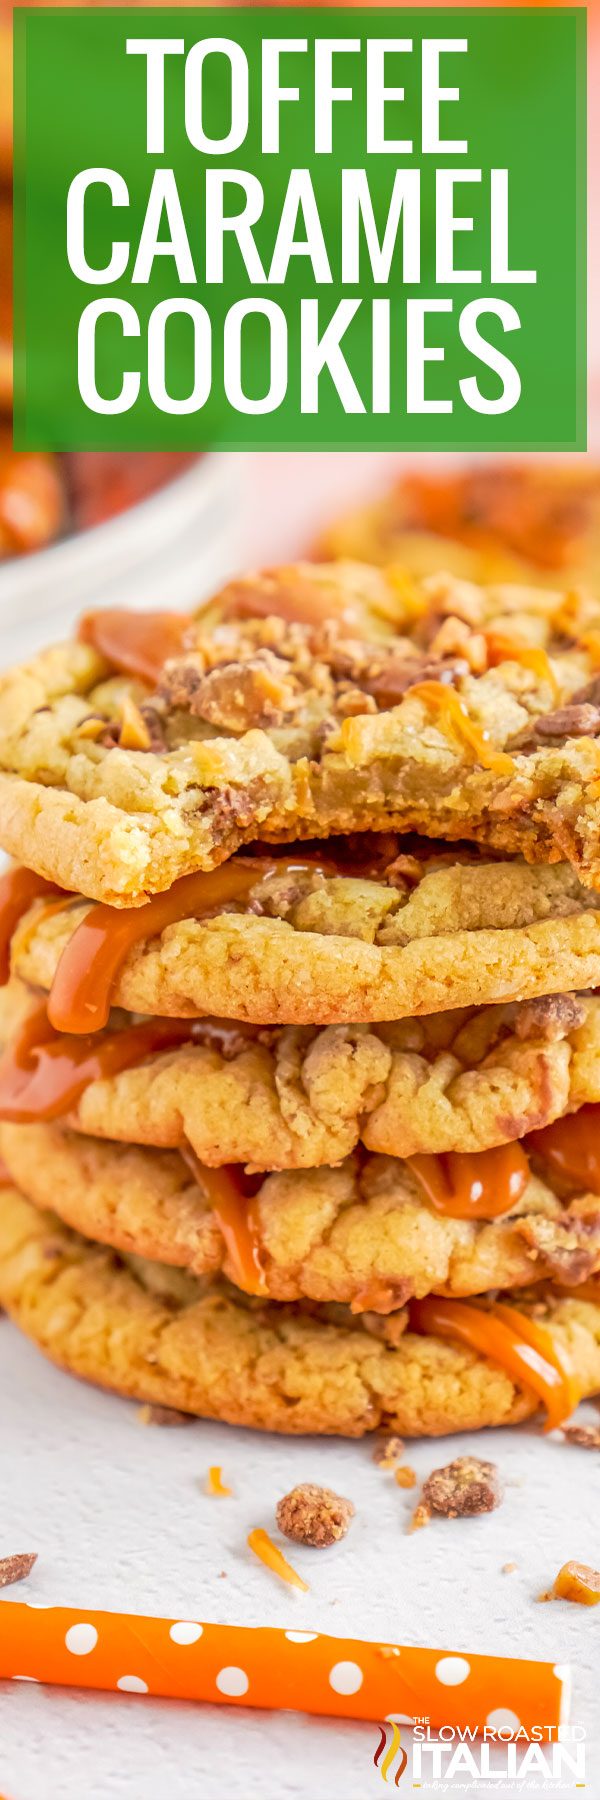 stack of toffee caramel cookies